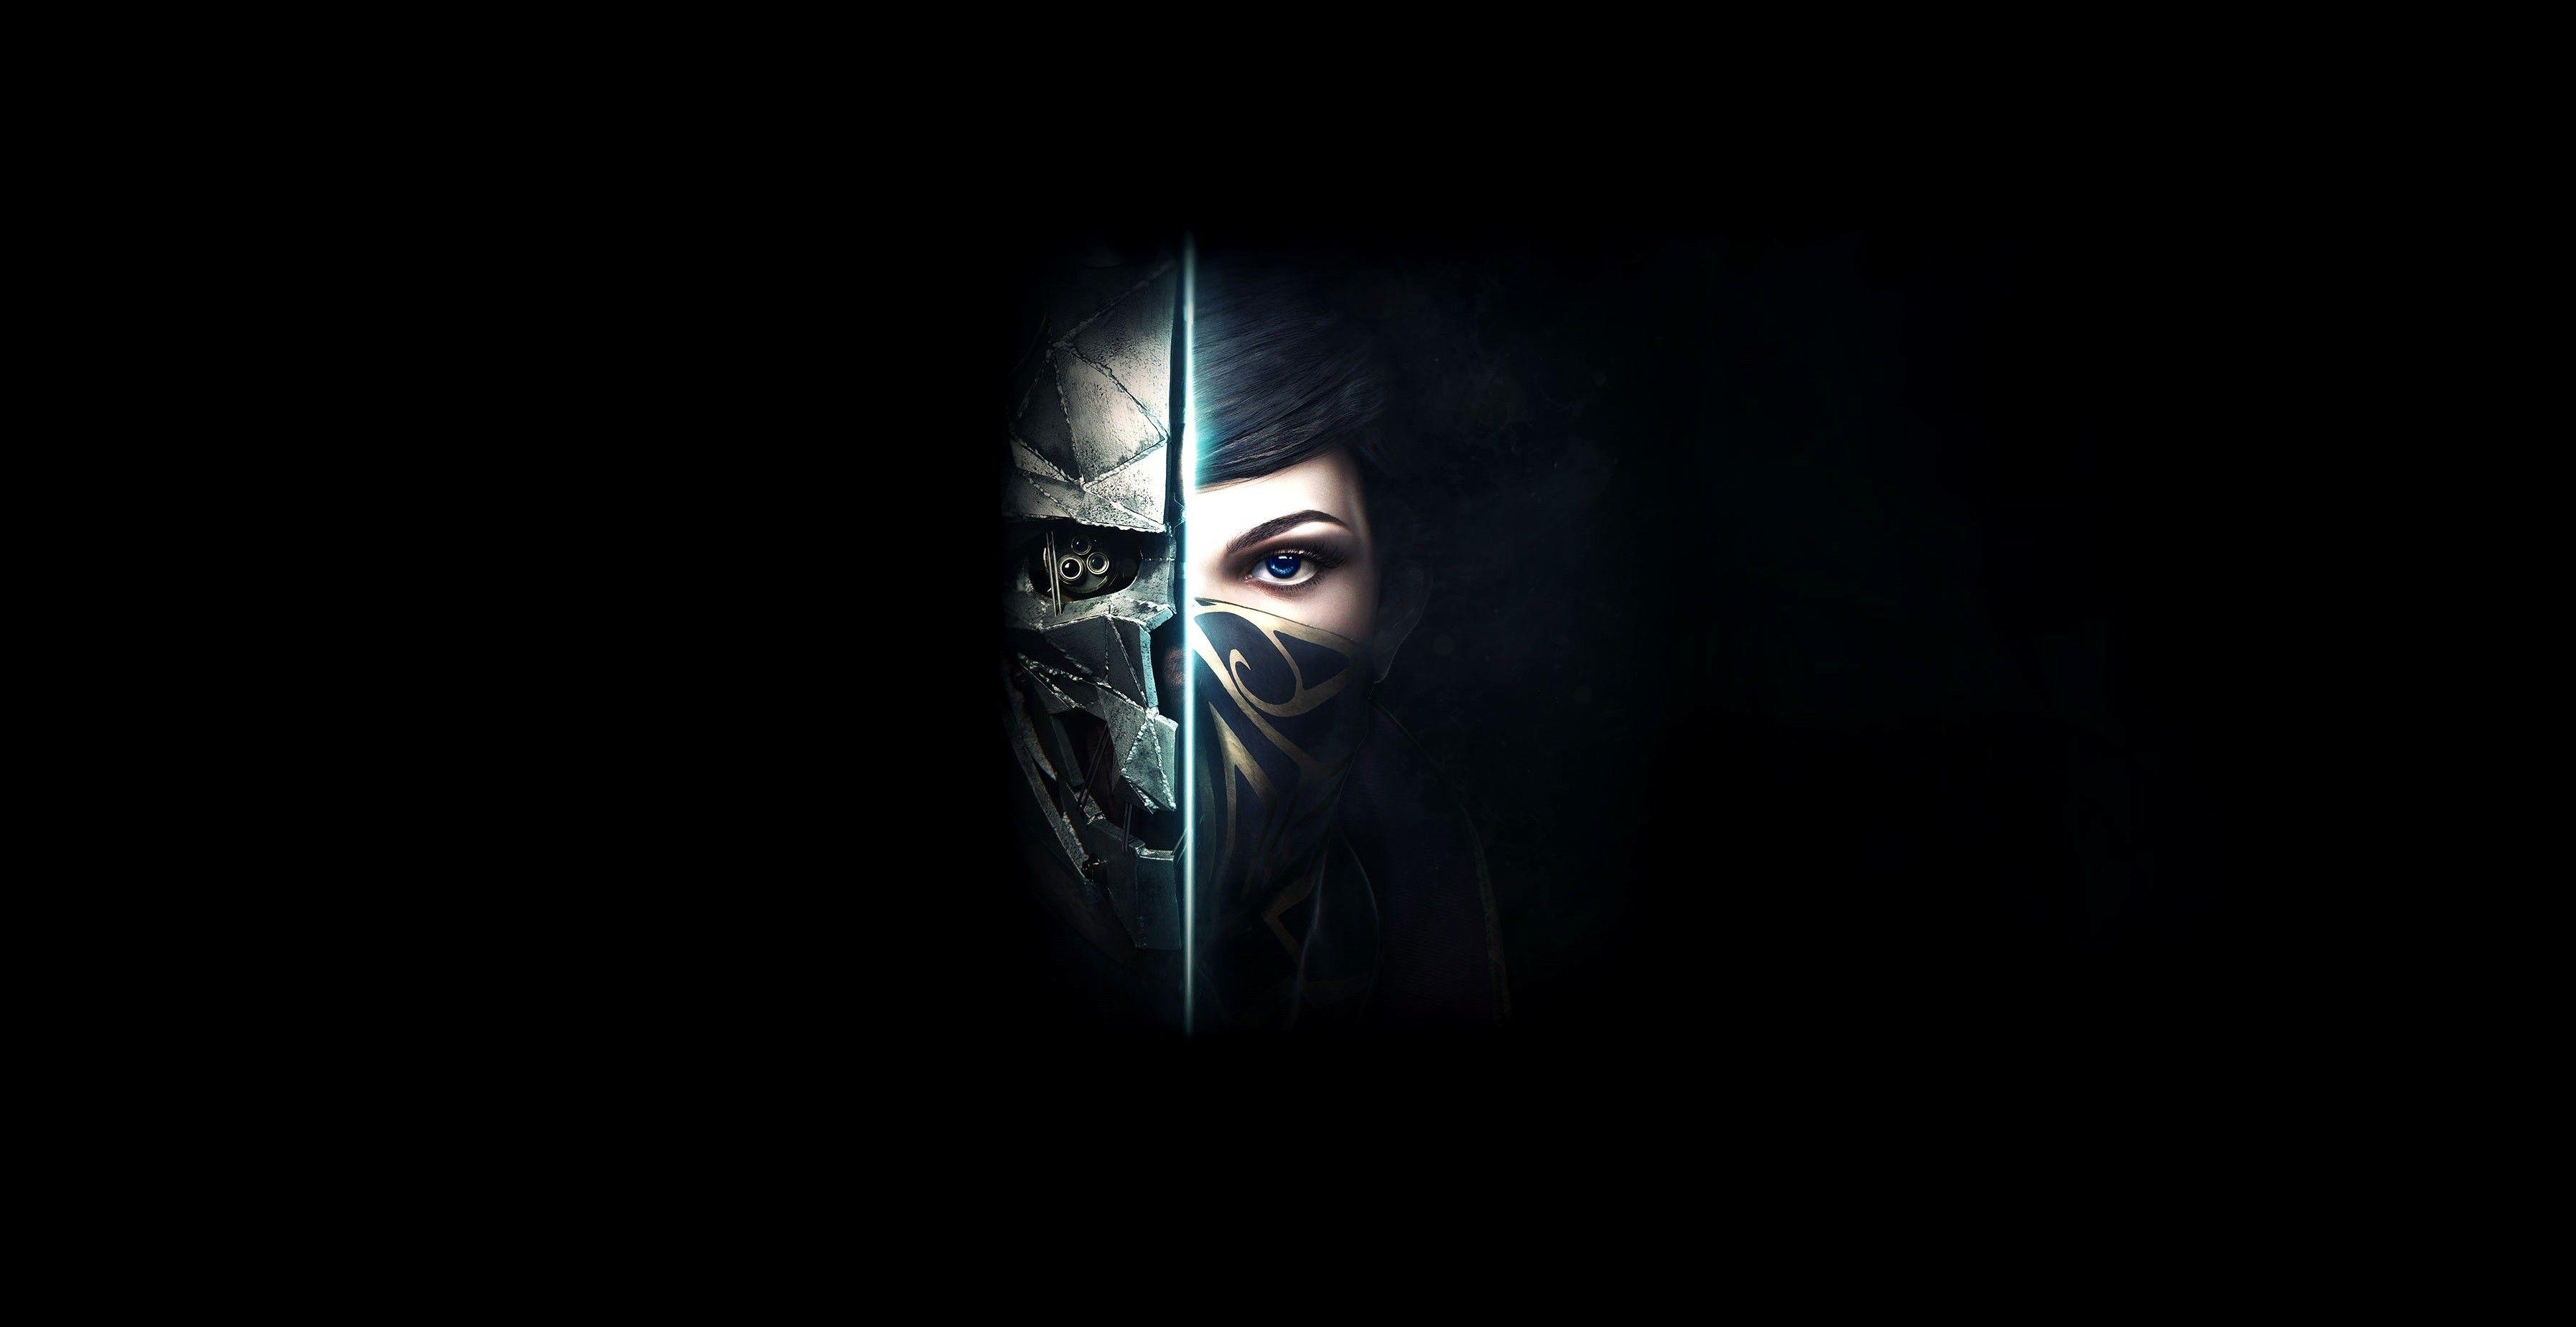 Dishonored 2 Wallpaper High Quality Free Download · Wallpaperhey